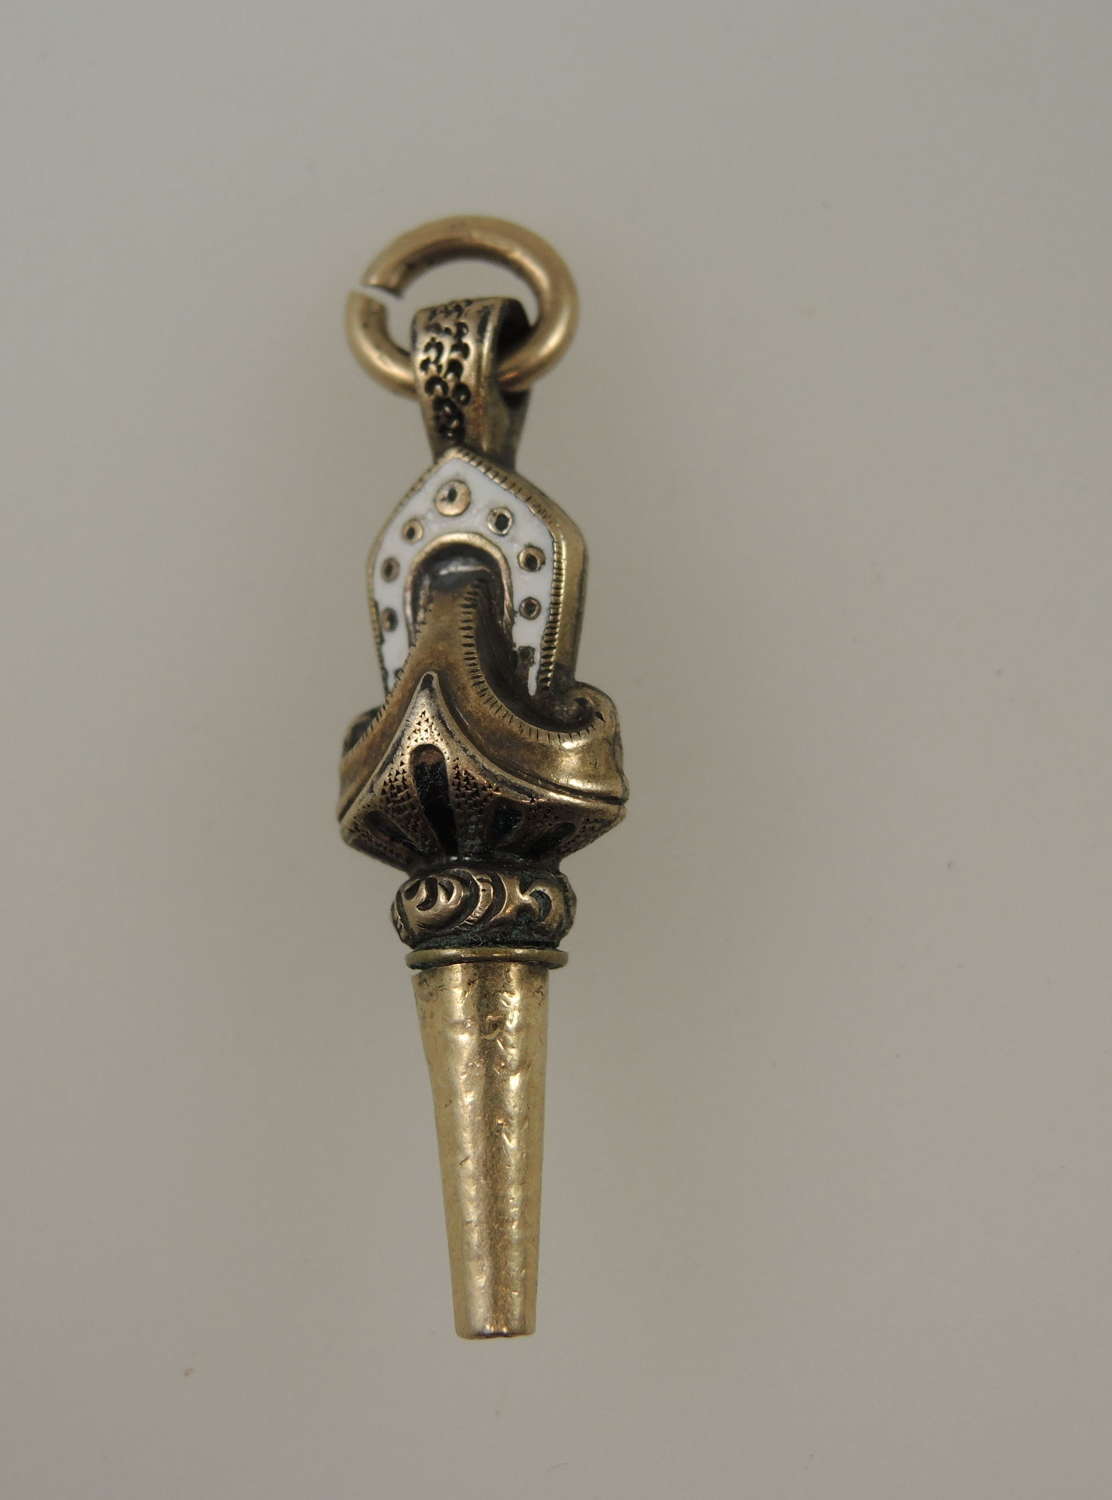 Beautiful gold cased and enamel knot shaped pocket watch key c1850